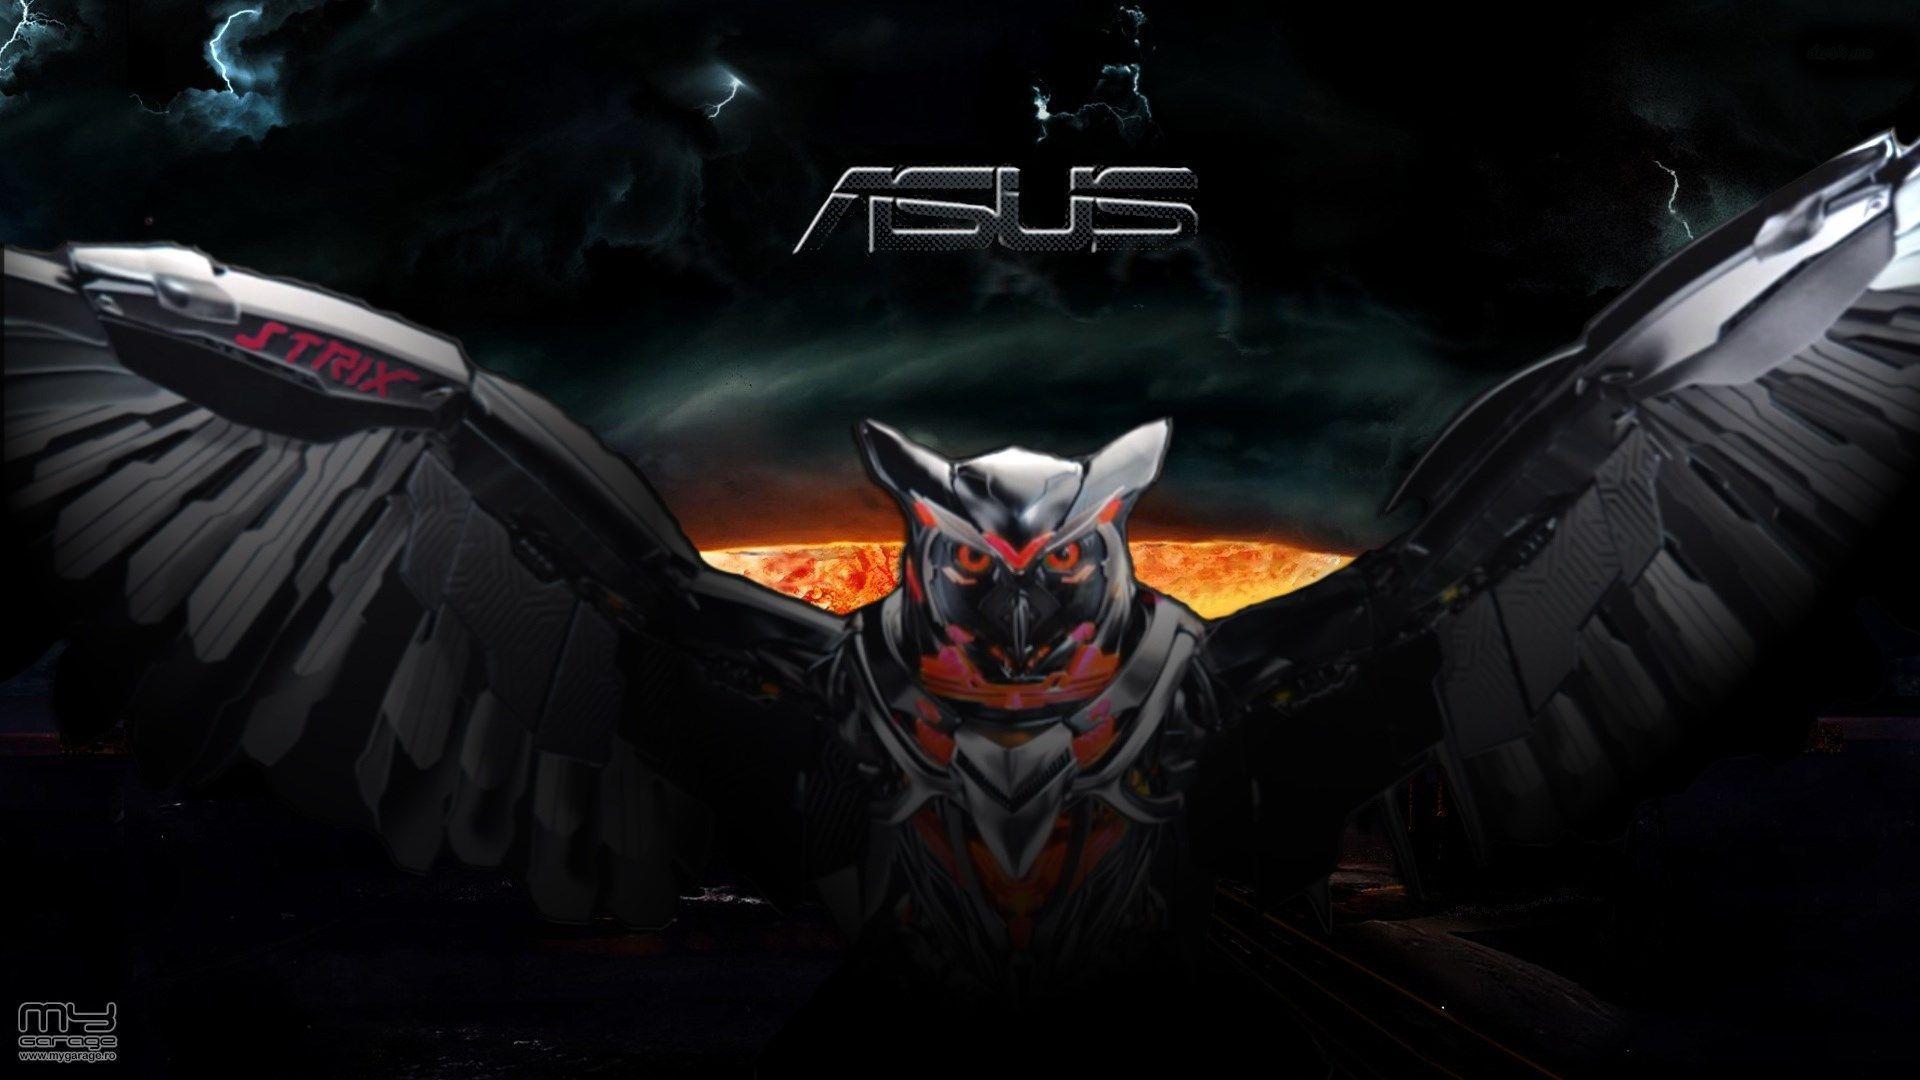 Asus Strix Wallpapers Top Free Asus Strix Backgrounds Wallpaperaccess